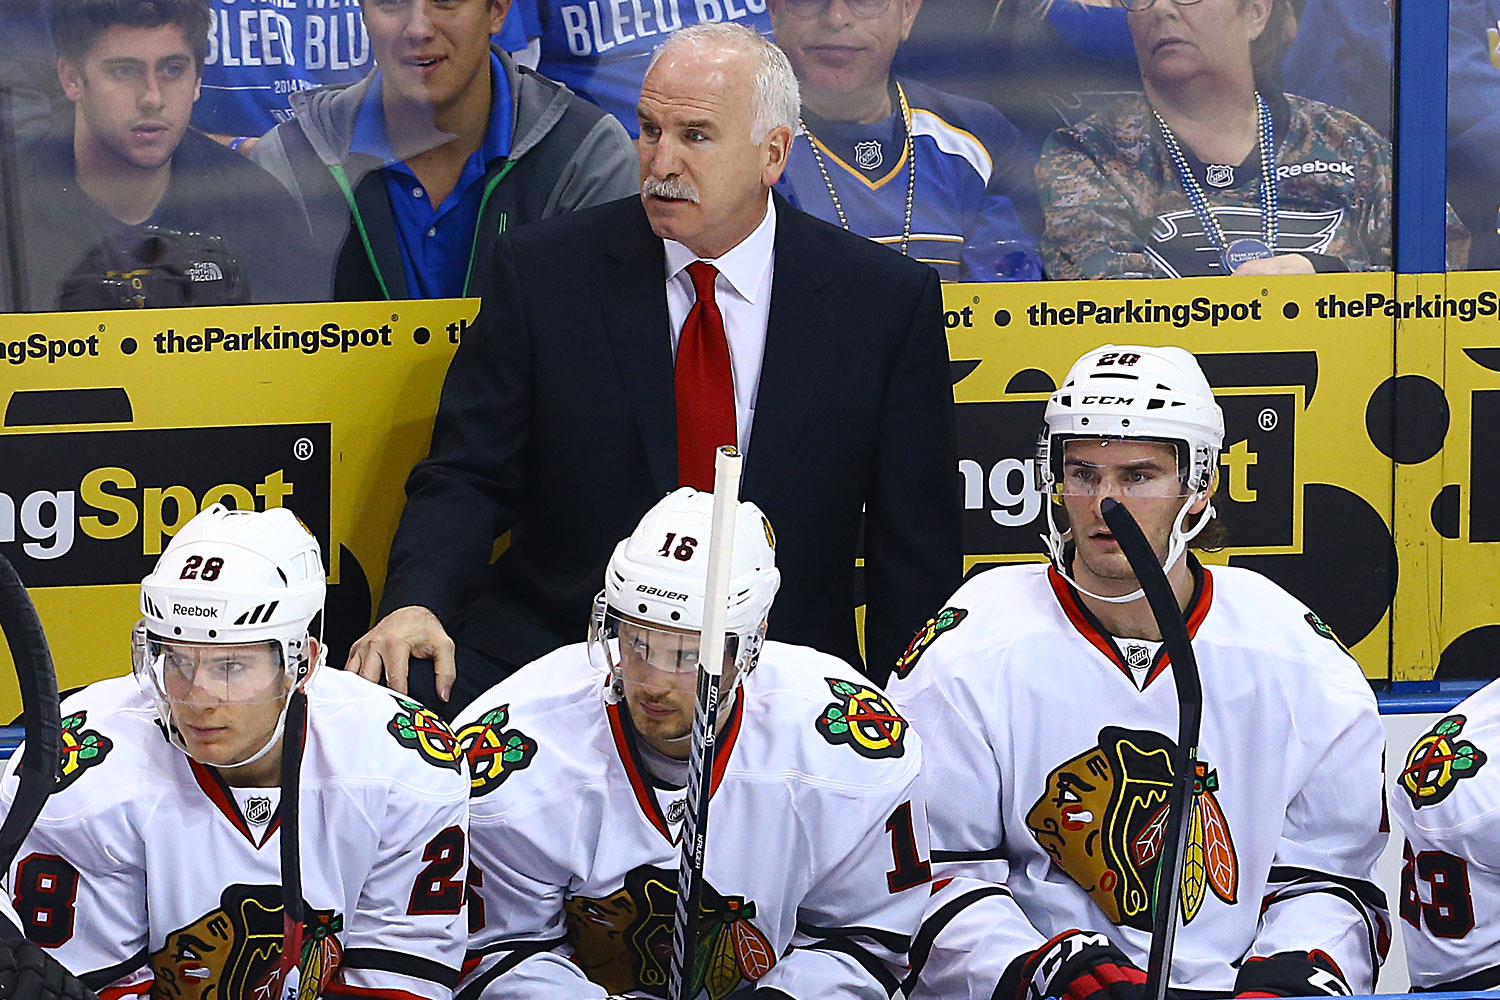 Chicago Blackhawks head coach Joel Quenneville during the first period in Game 1 of the NHL Playoffs between the St. Louis Blues and the Chicago Blackhawks at Scottrade Center in St. Louis, Missouri. (Billy Hurst—AP)